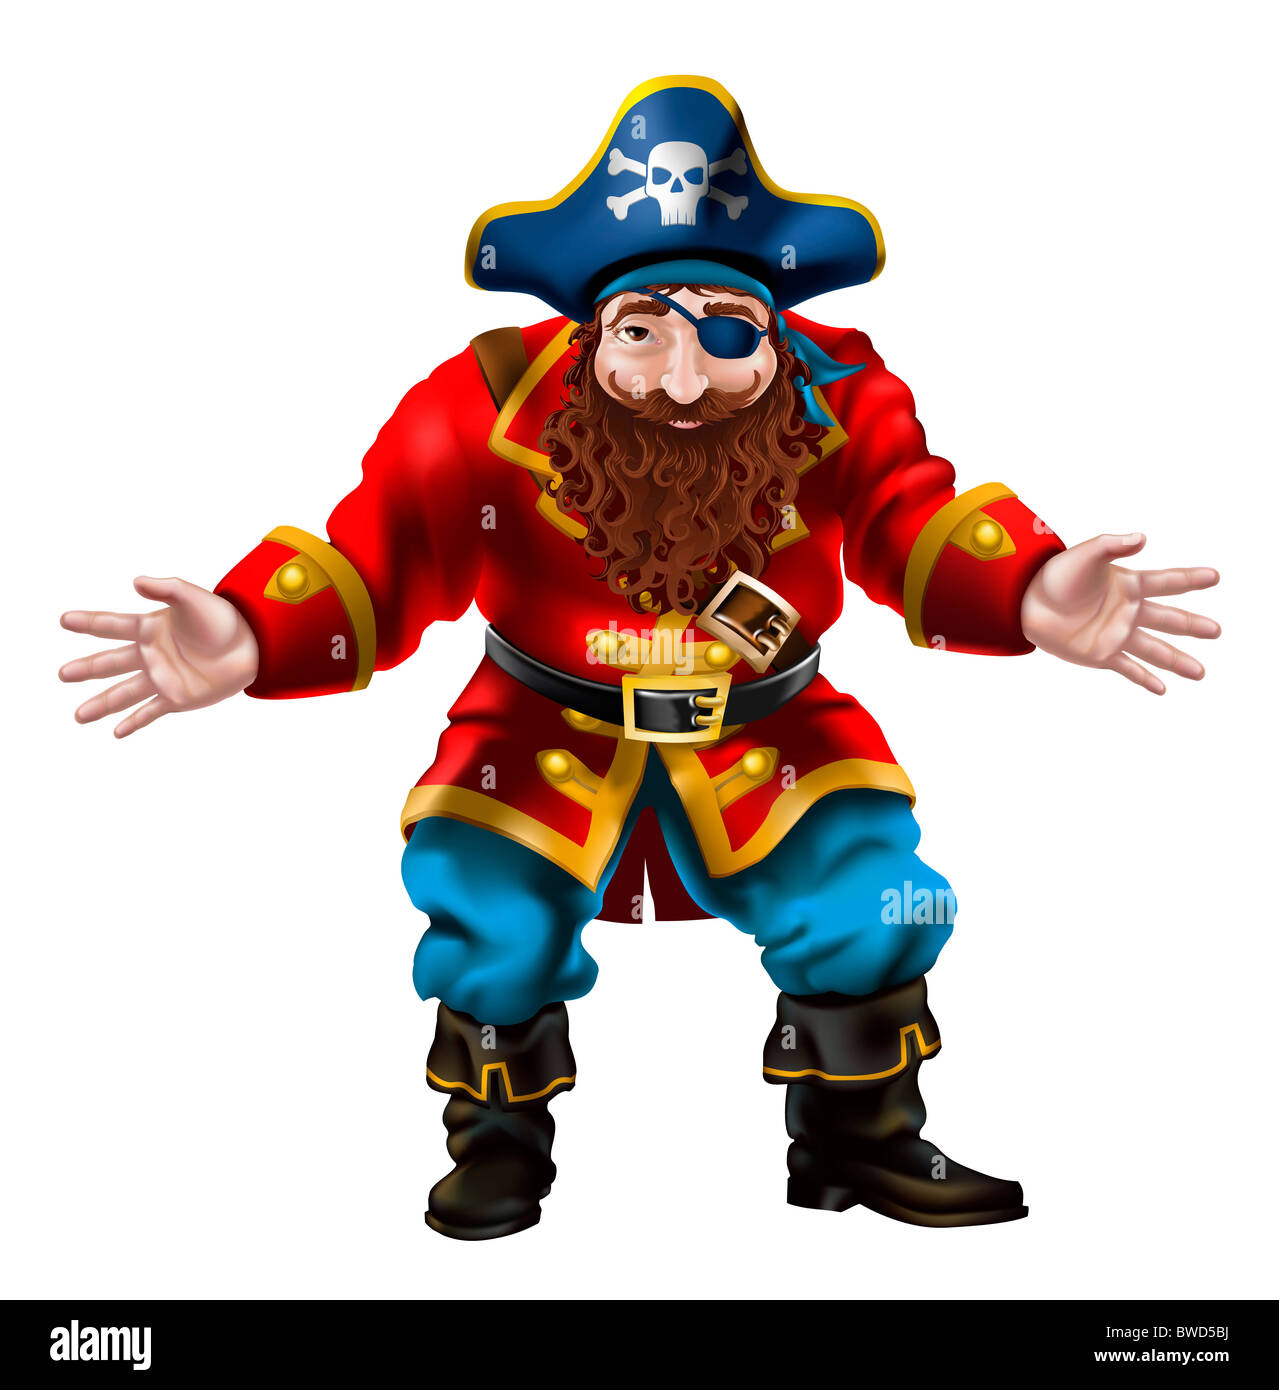 Illustration of a pirate character Stock Photo